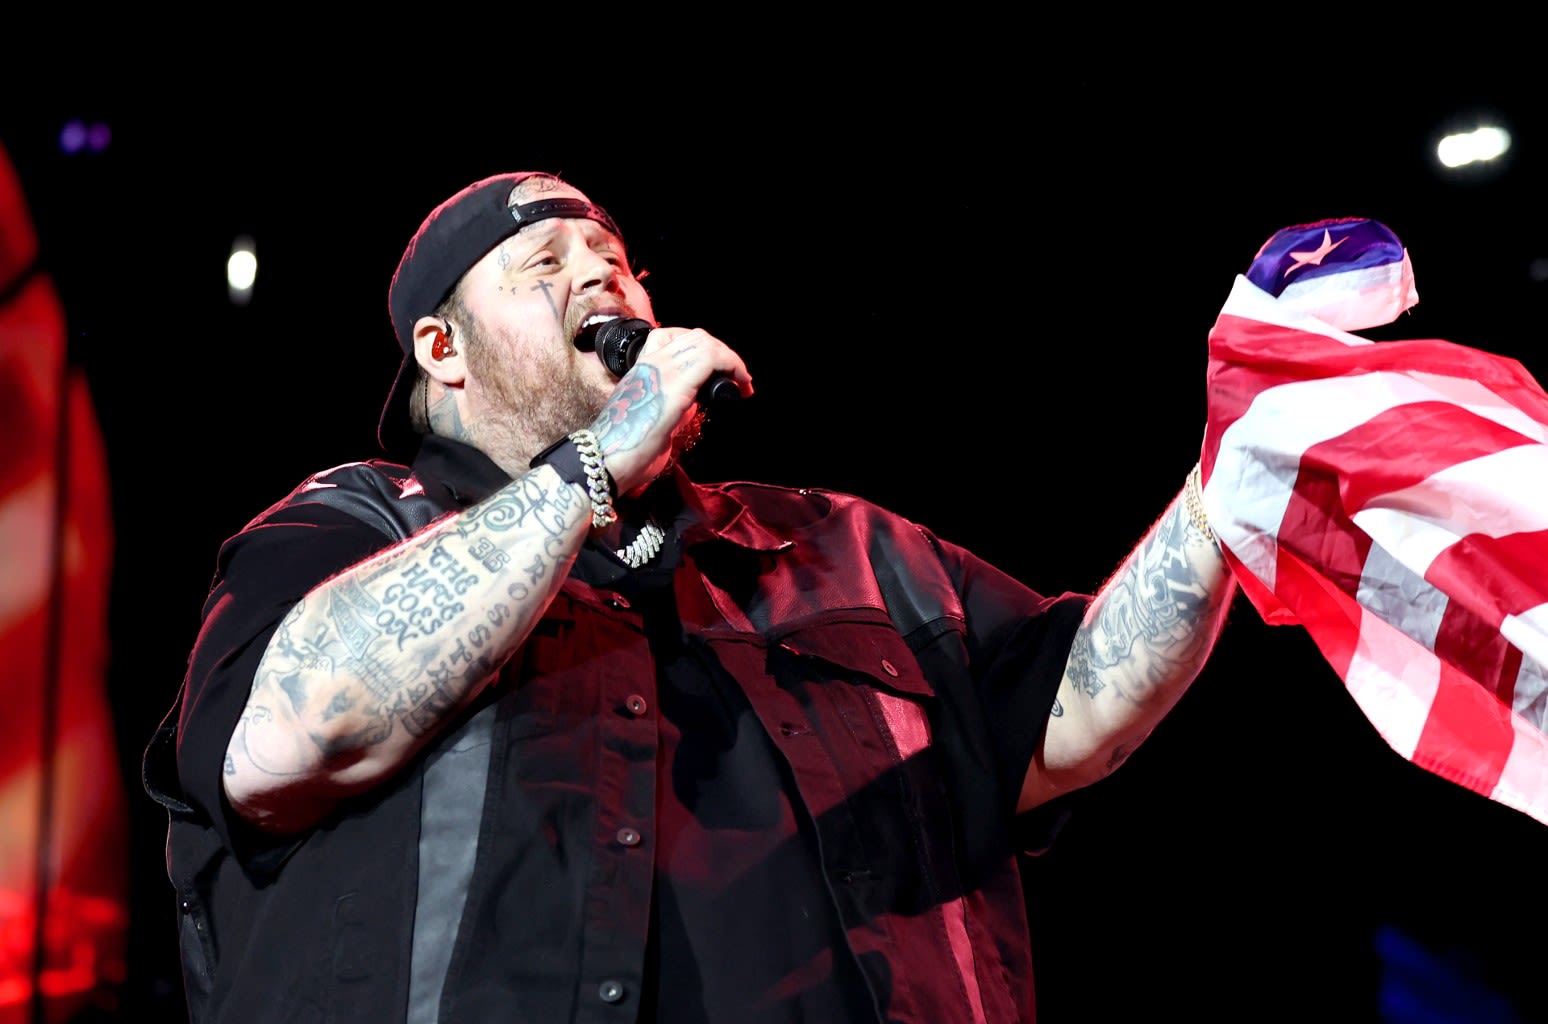 Jelly Roll Joined Limp Bizkit For a Surprise Cover of Who Classic at Welcome to Rockville Fest